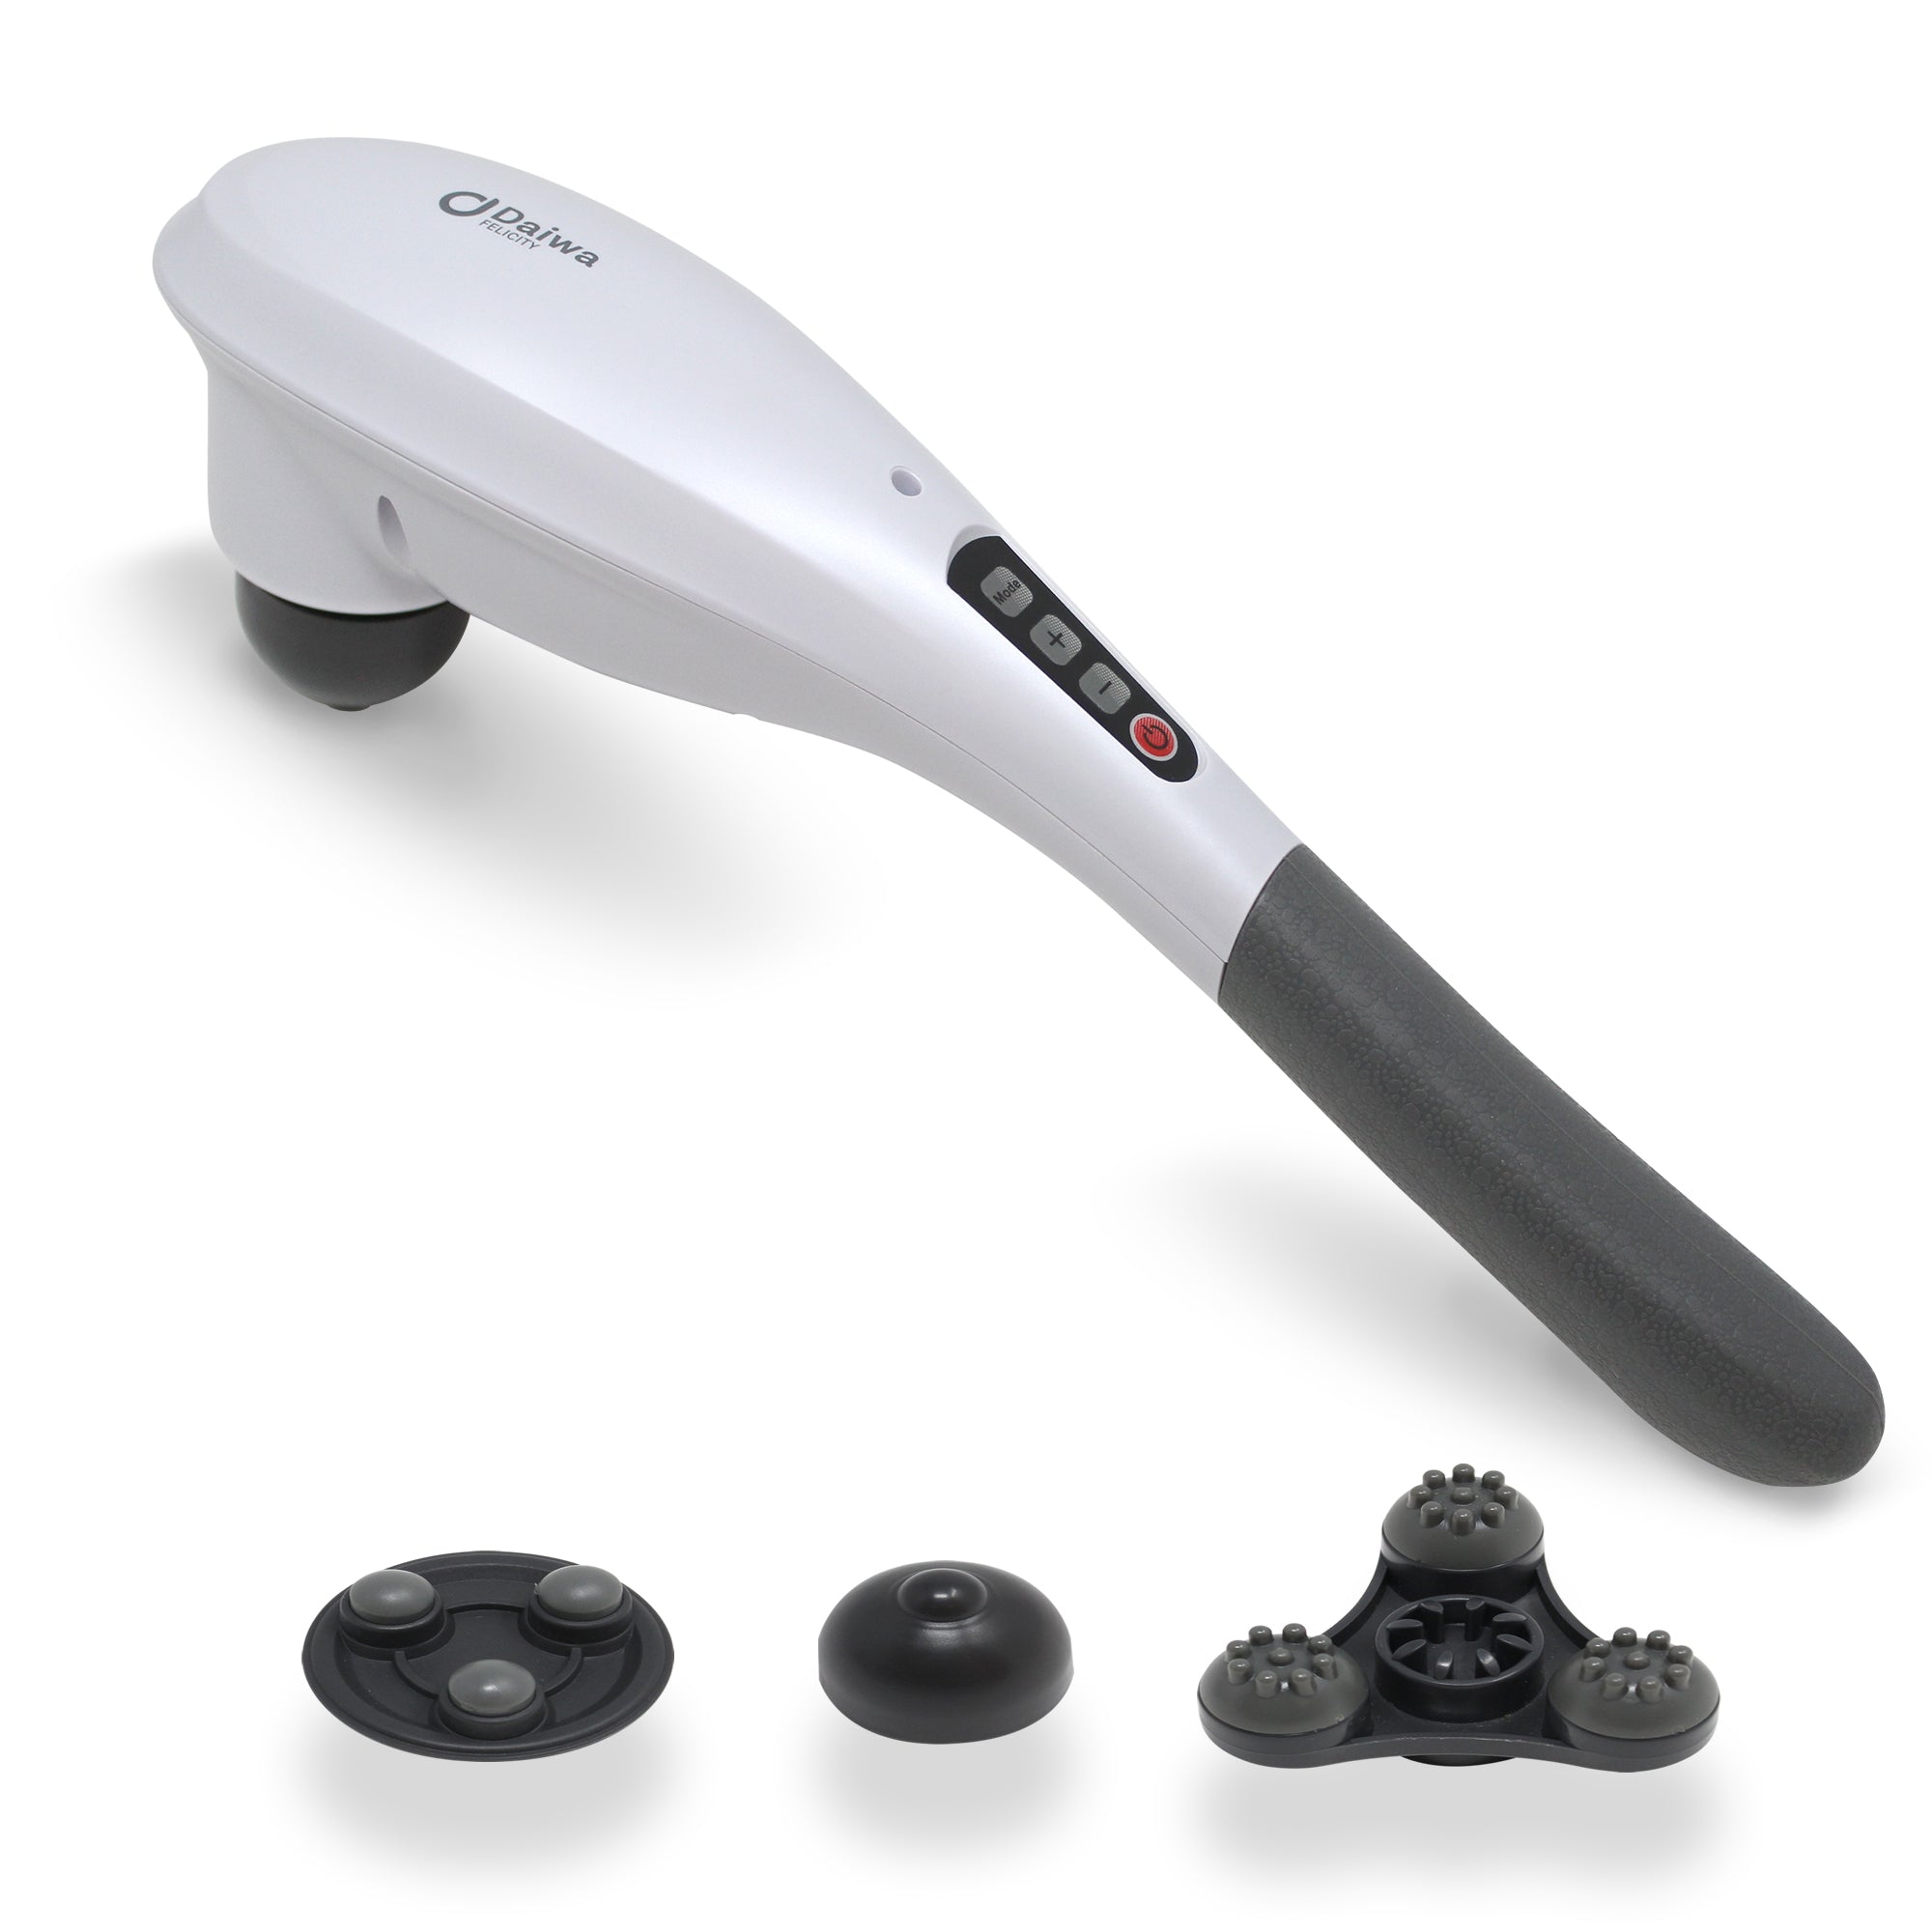 Tapping Pro Cordless Hand Held Percussion Massager